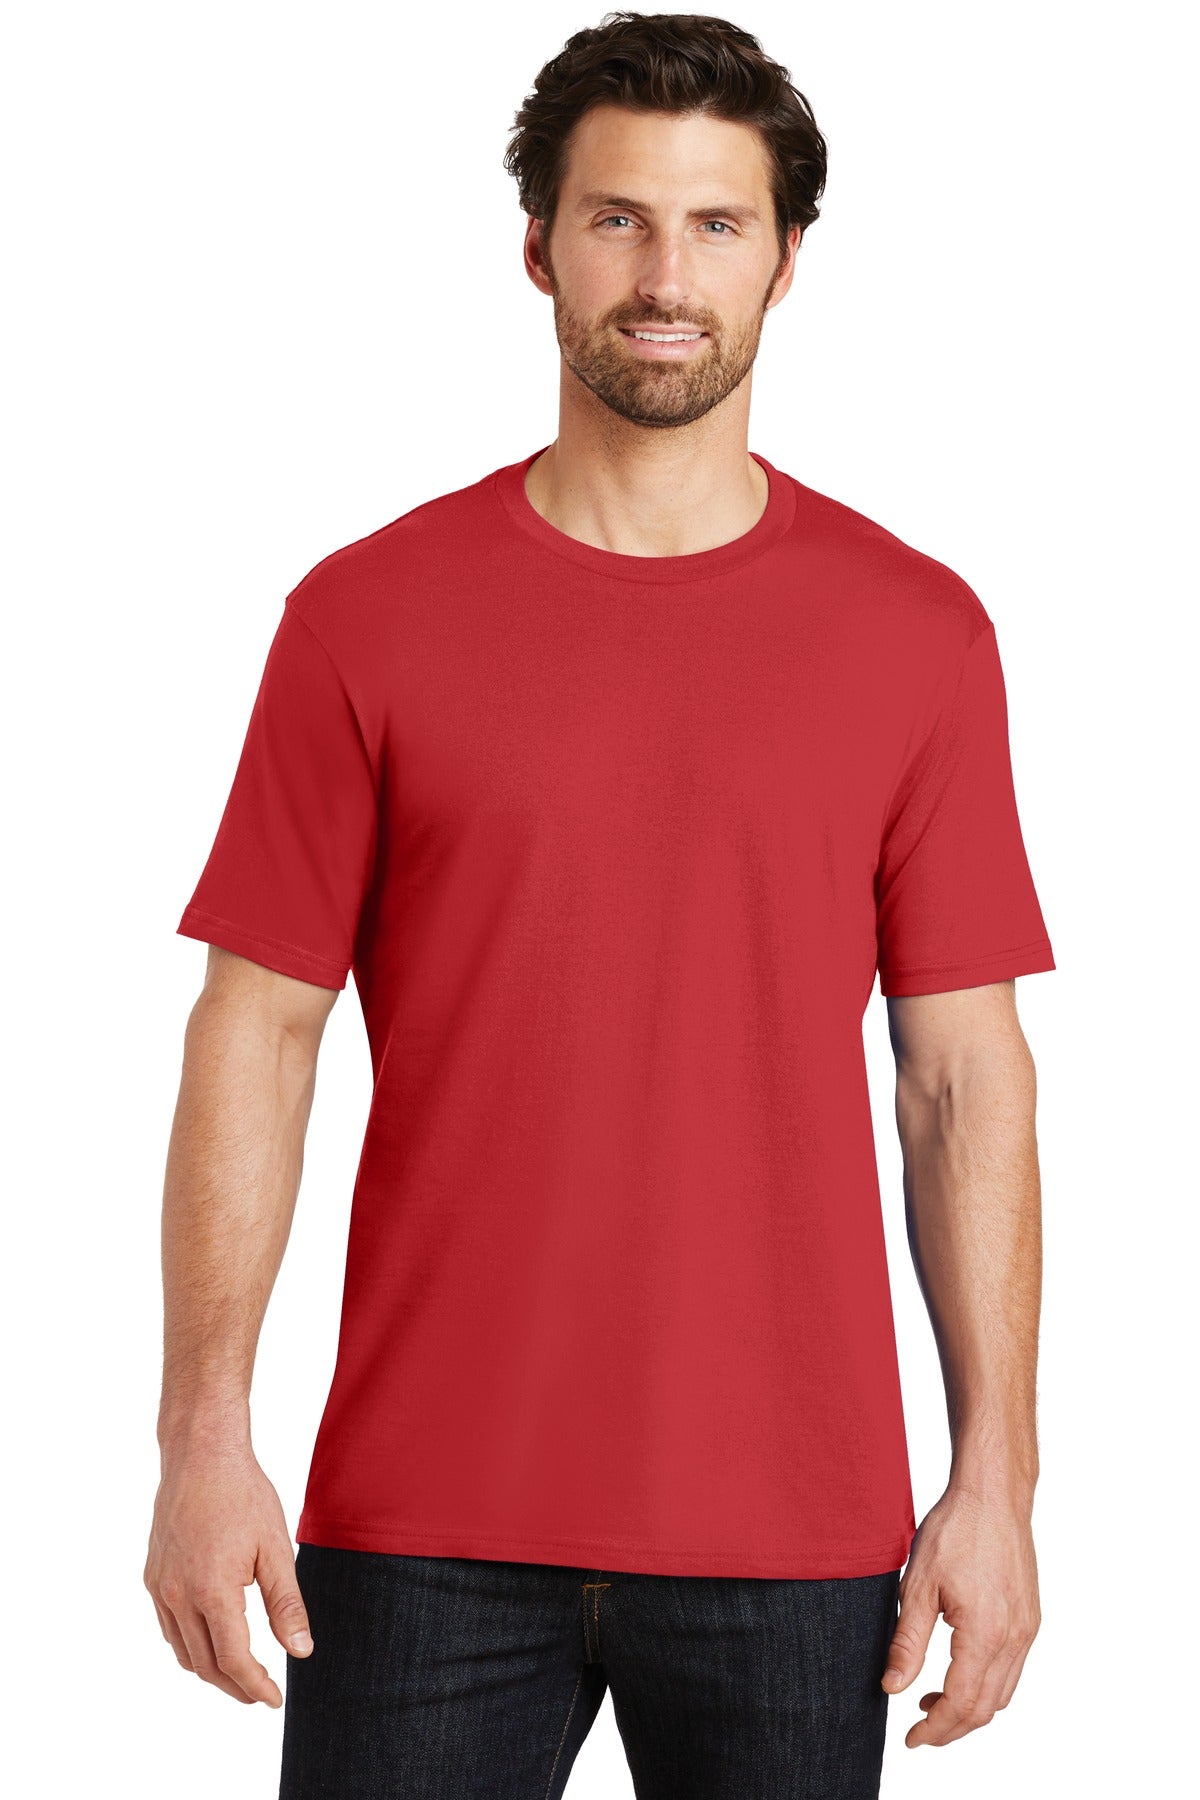 DT104-ClassicRed-XS